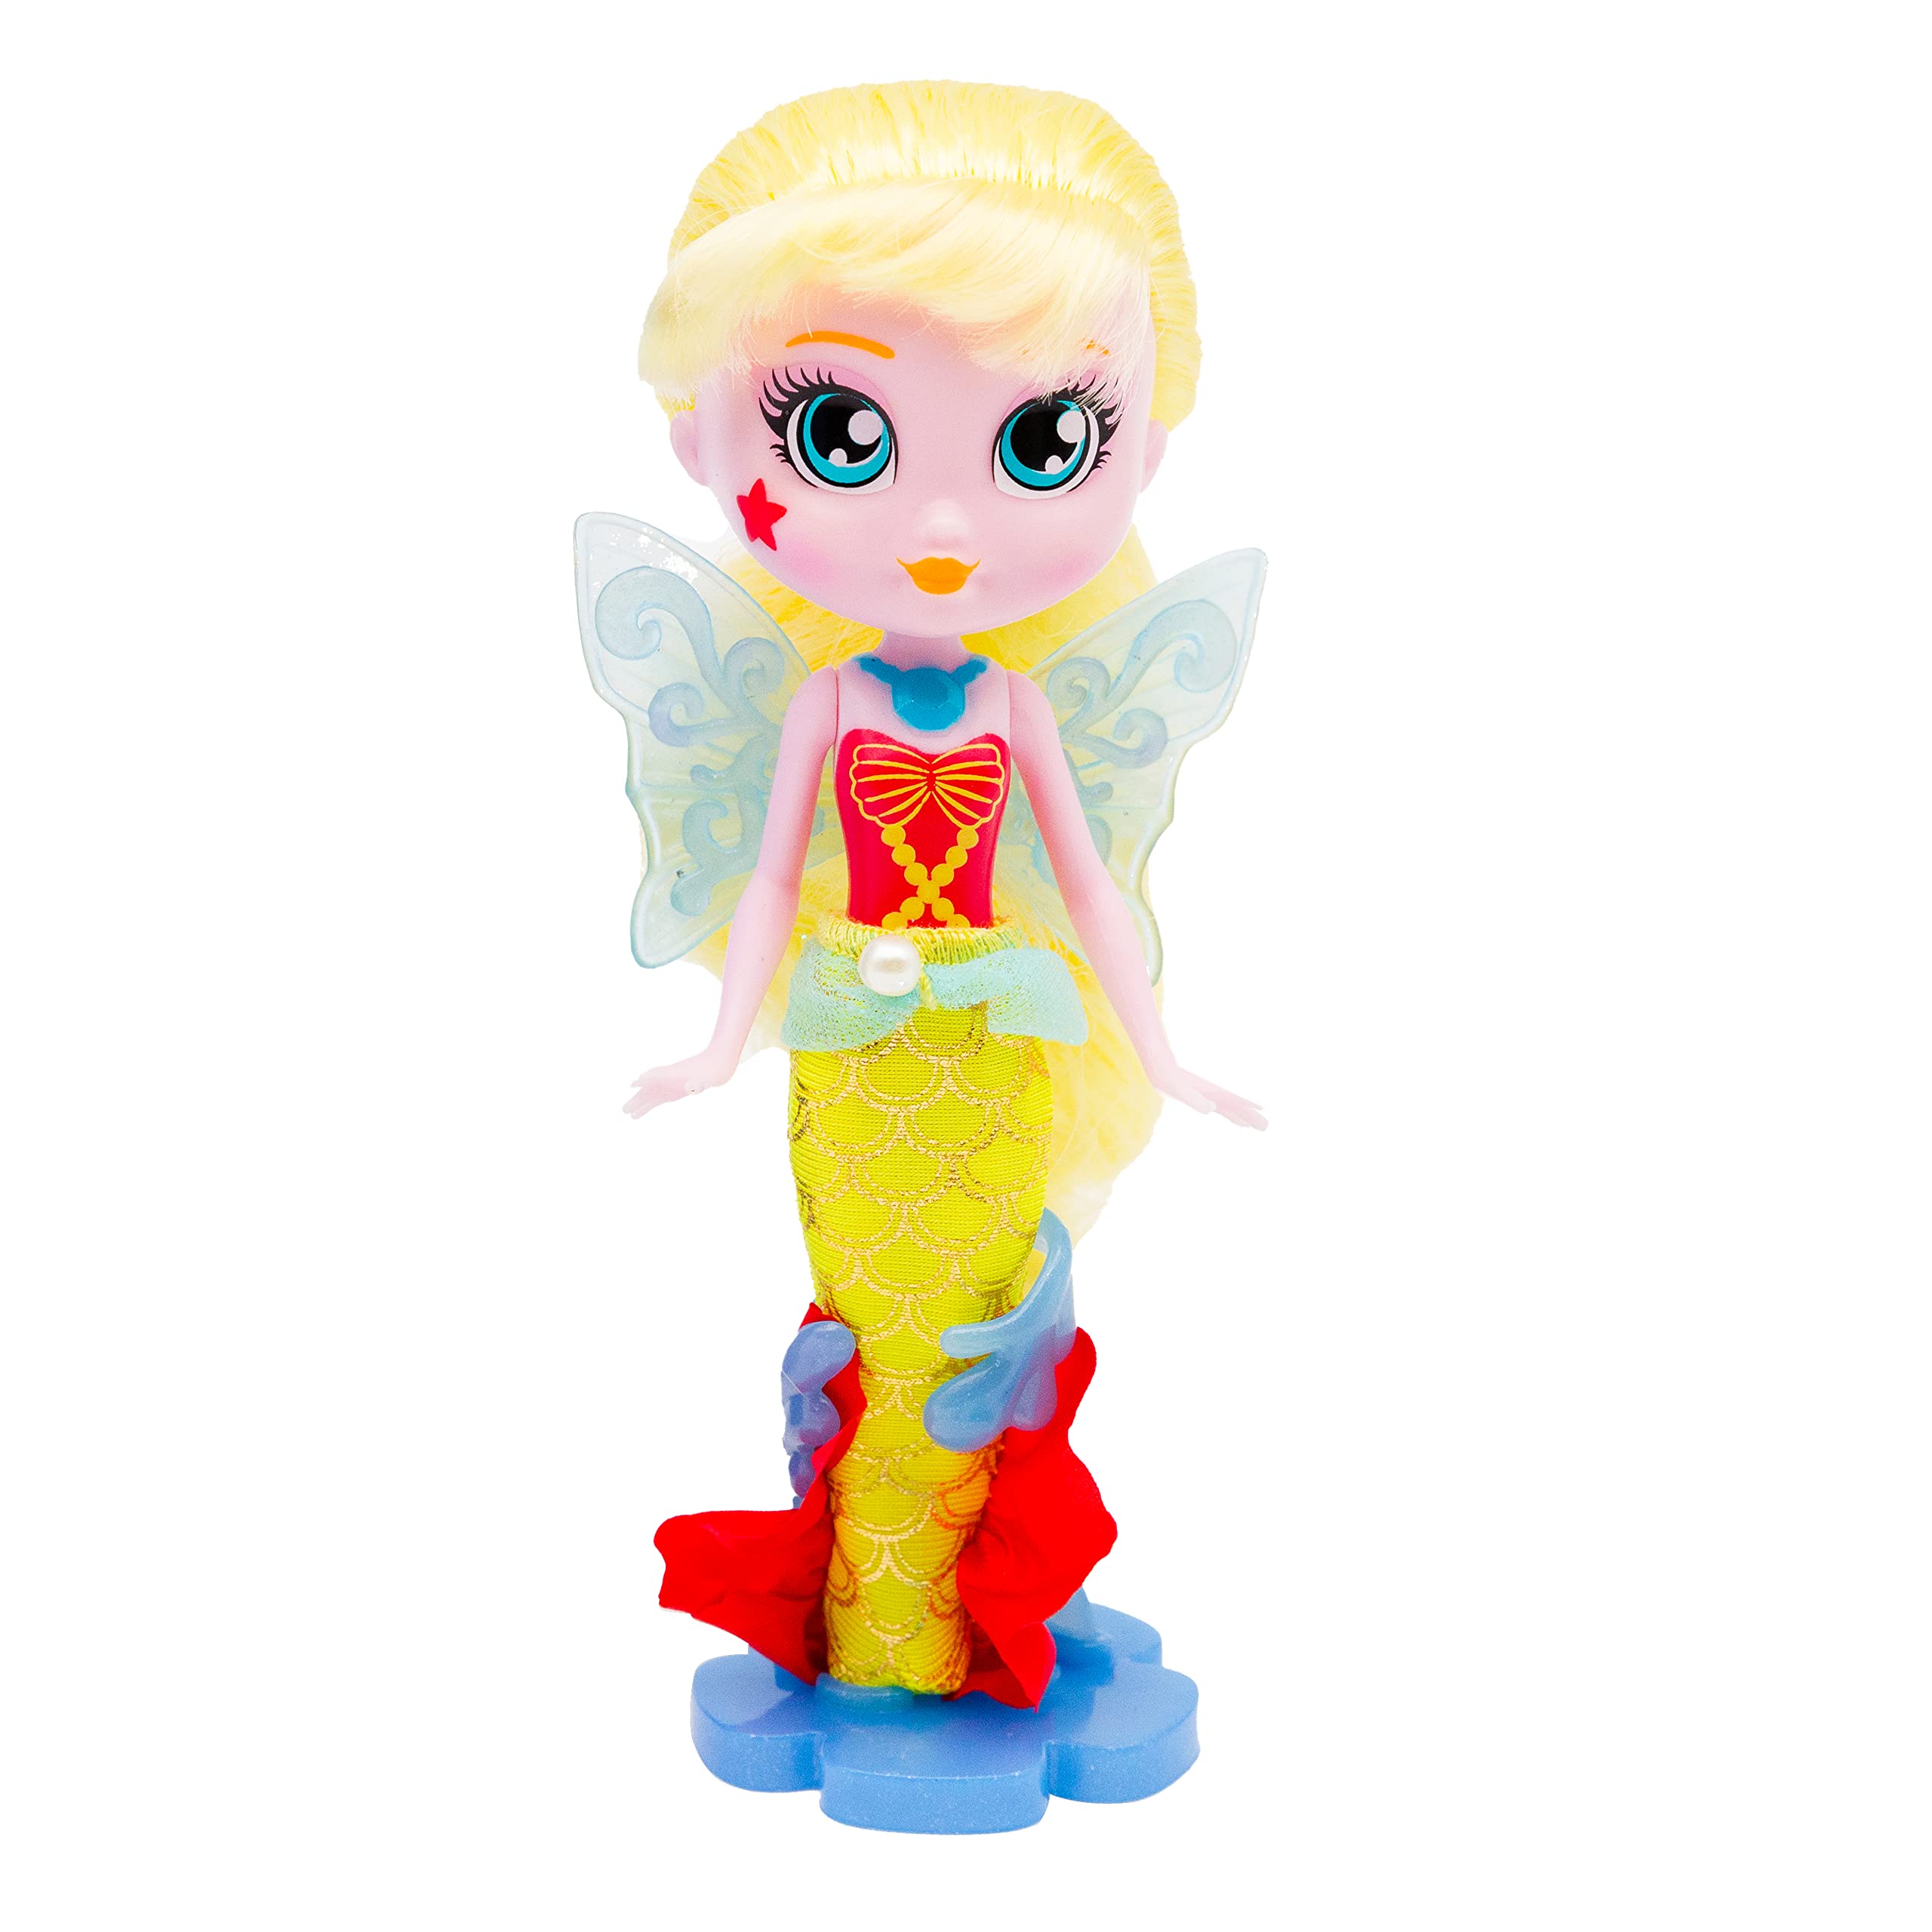 Bright Fairy Friends BFF Mermaid Doll with Color Change Wings, 4 Surprise Mermaid Accessories, Motion Activated Light up Jar, Ideal Nightlight for Kids, Gifts for Kids 3 Years and Older